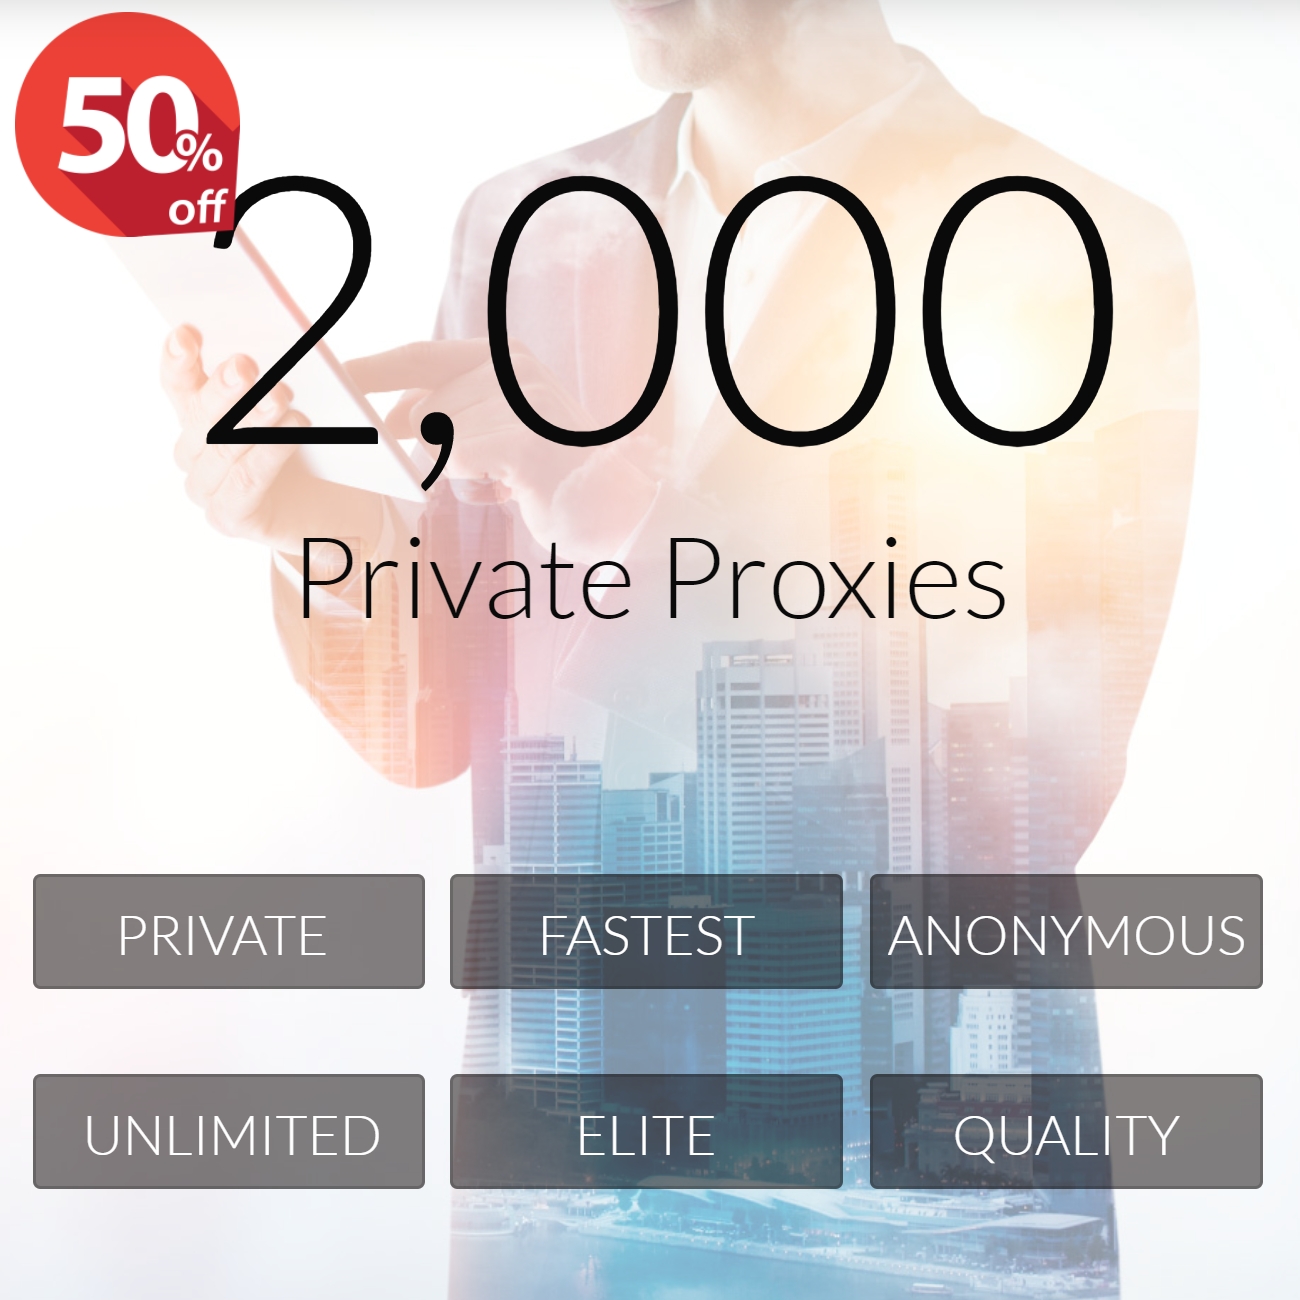 extraproxies 2000 private proxies